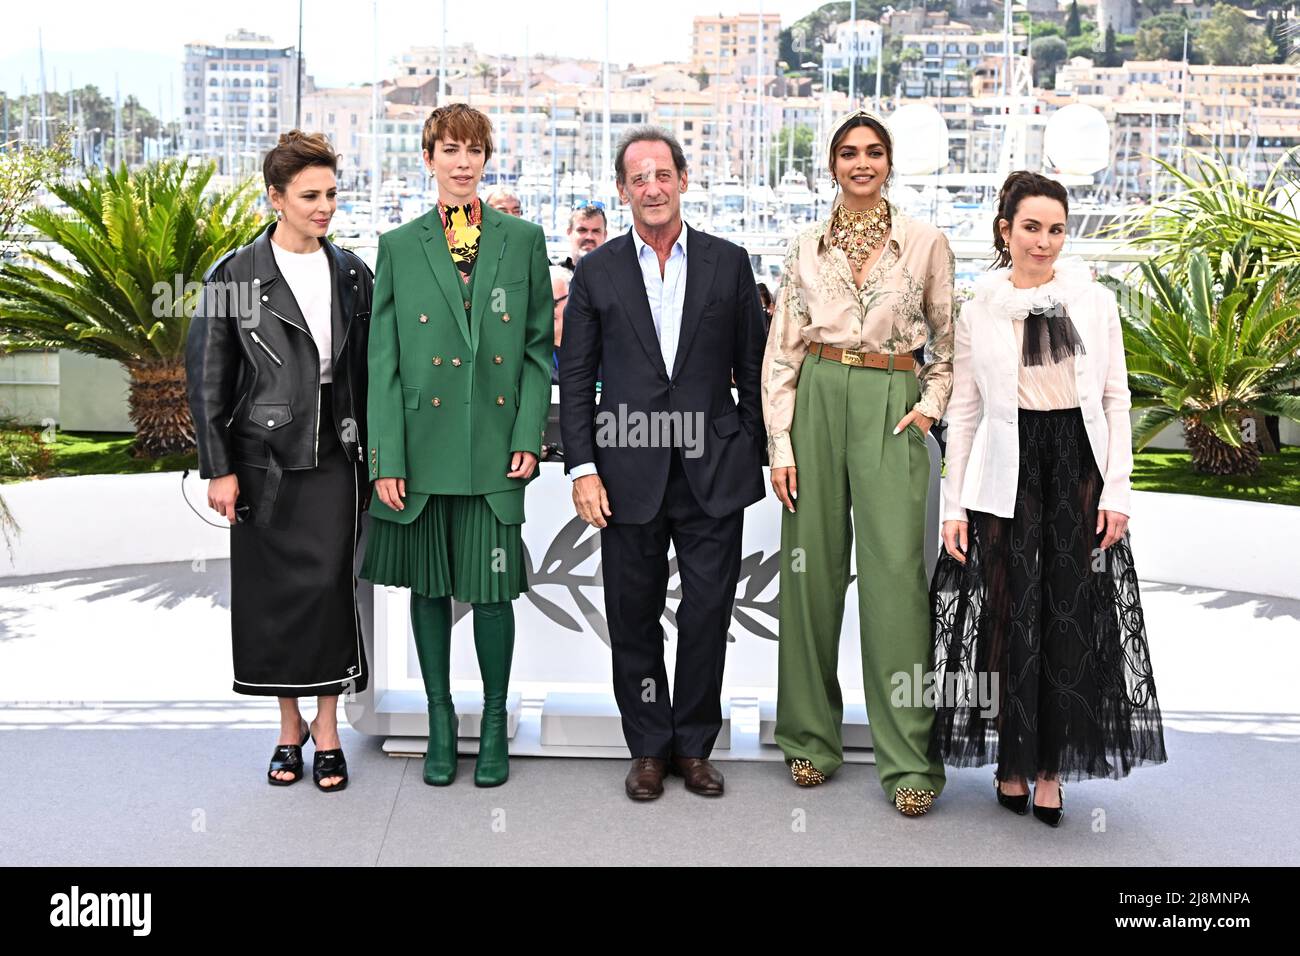 Cannes, France. 17th May, 2022. Italian actress Jasmine Trinca, British actress Rebecca Hall, President of the Jury Vincent Lindon, Indian actress Deepika Padukone and Swedish actress Noomi Rapace during the Jury Photocall as part of the 75th Cannes International Film Festival in Cannes, France on May 17, 2022. Photo by David Niviere/ABACAPRESS.COM Credit: Abaca Press/Alamy Live News Stock Photo